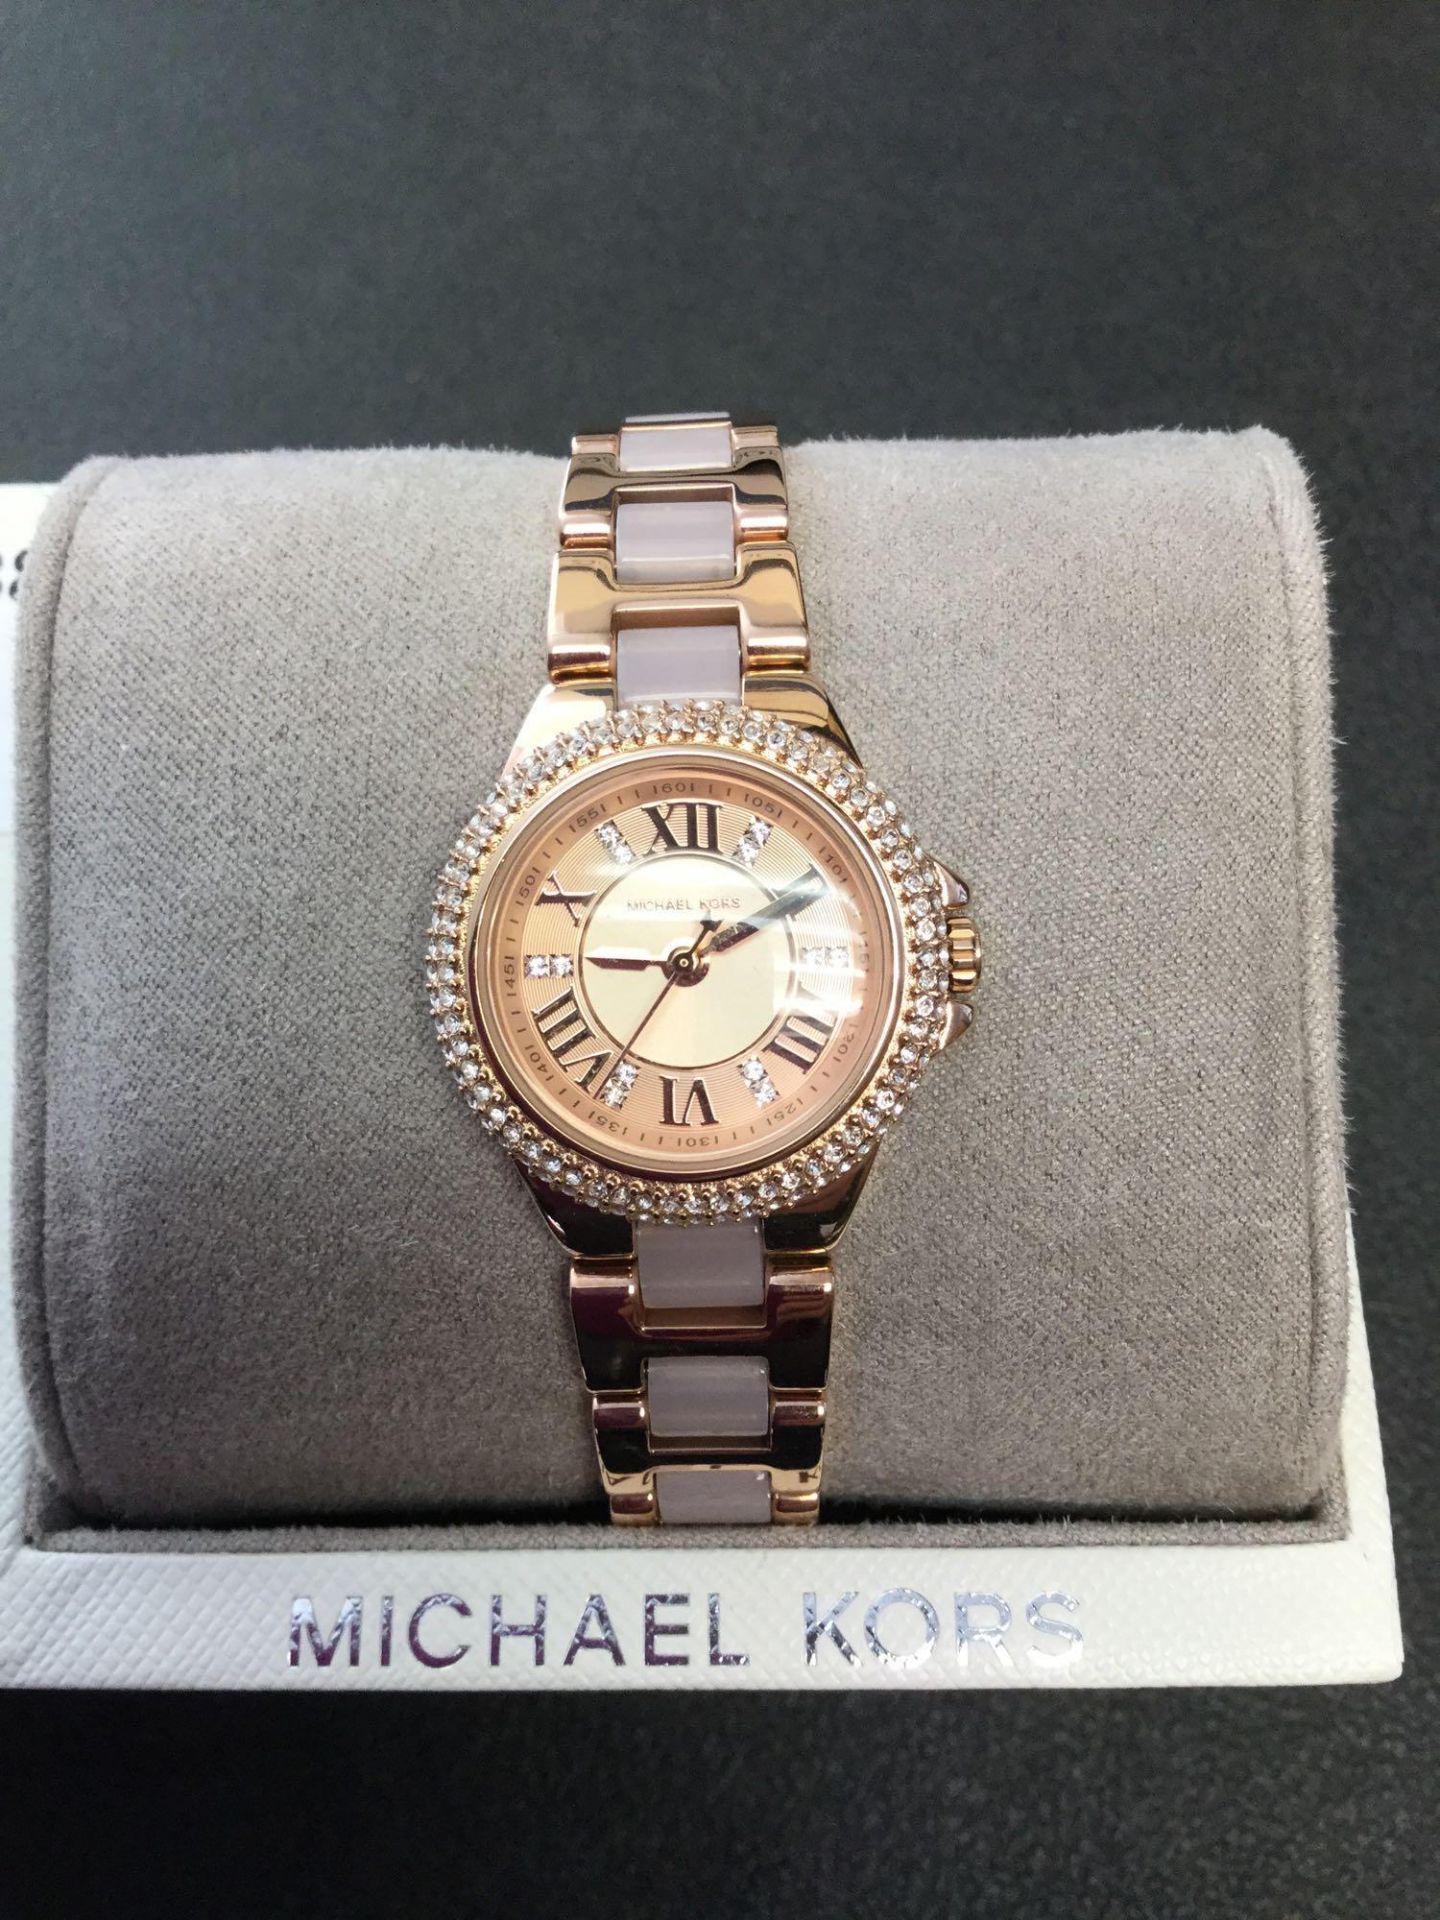 Michael Kors Women's watch - Copper tone Face and Band - Box Included - Image 2 of 2